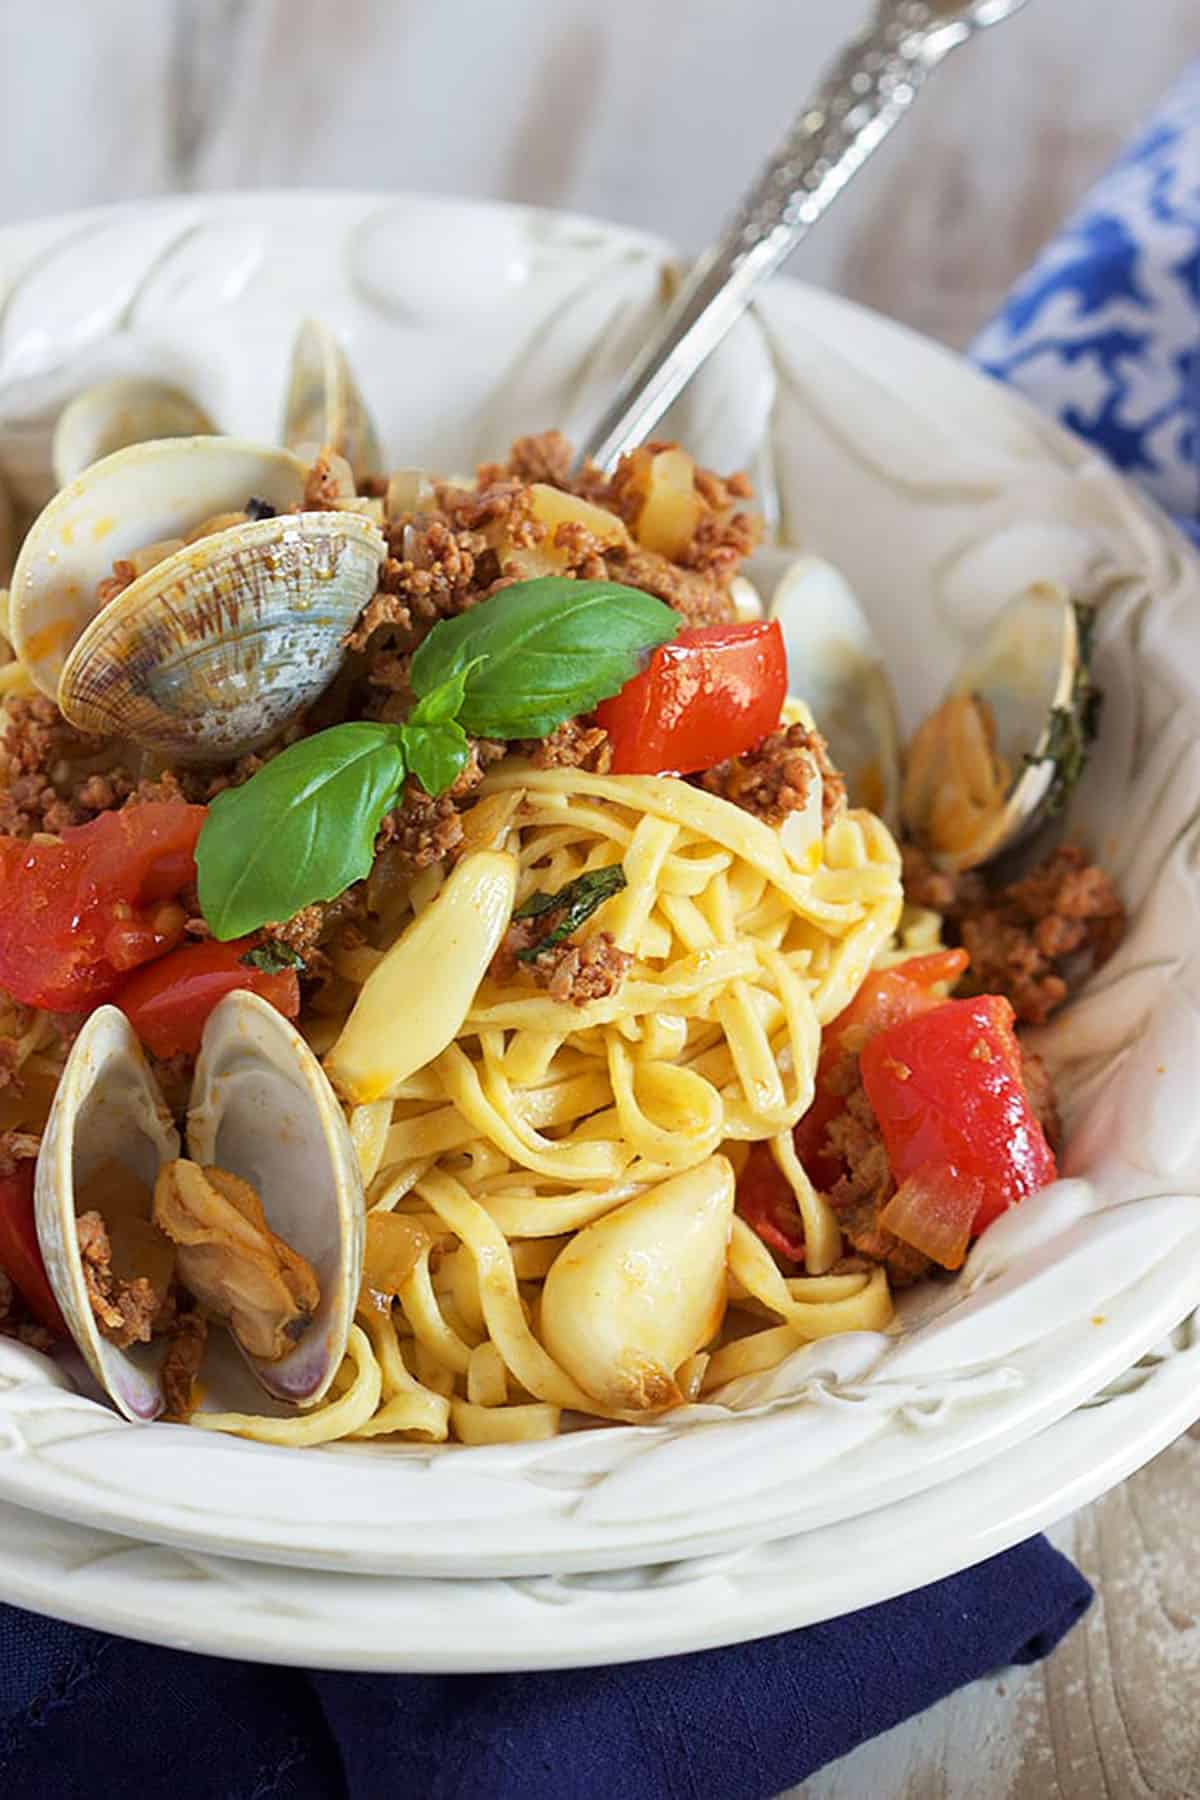 Linguine with clams in a white bowl with a silver fork.